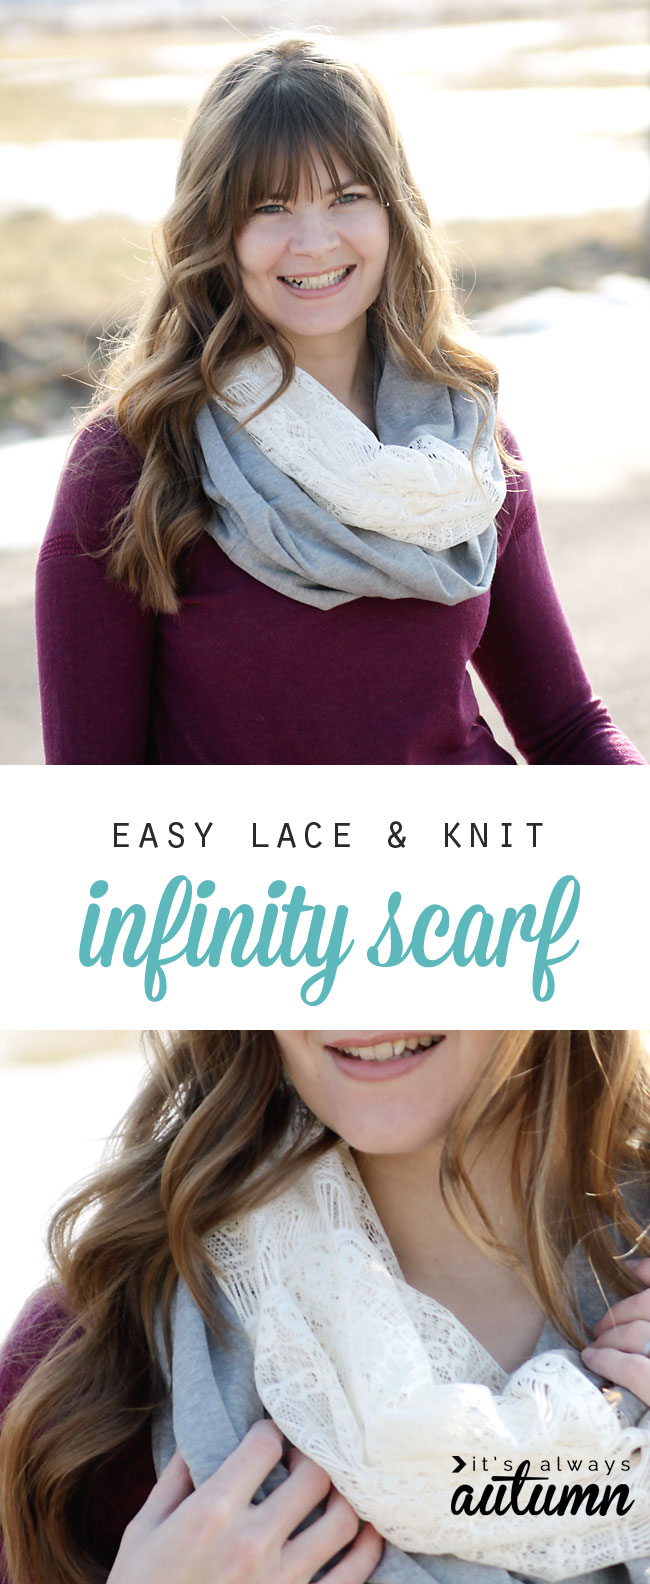 woman wearing an easy to sew lace and knit infinity scarf